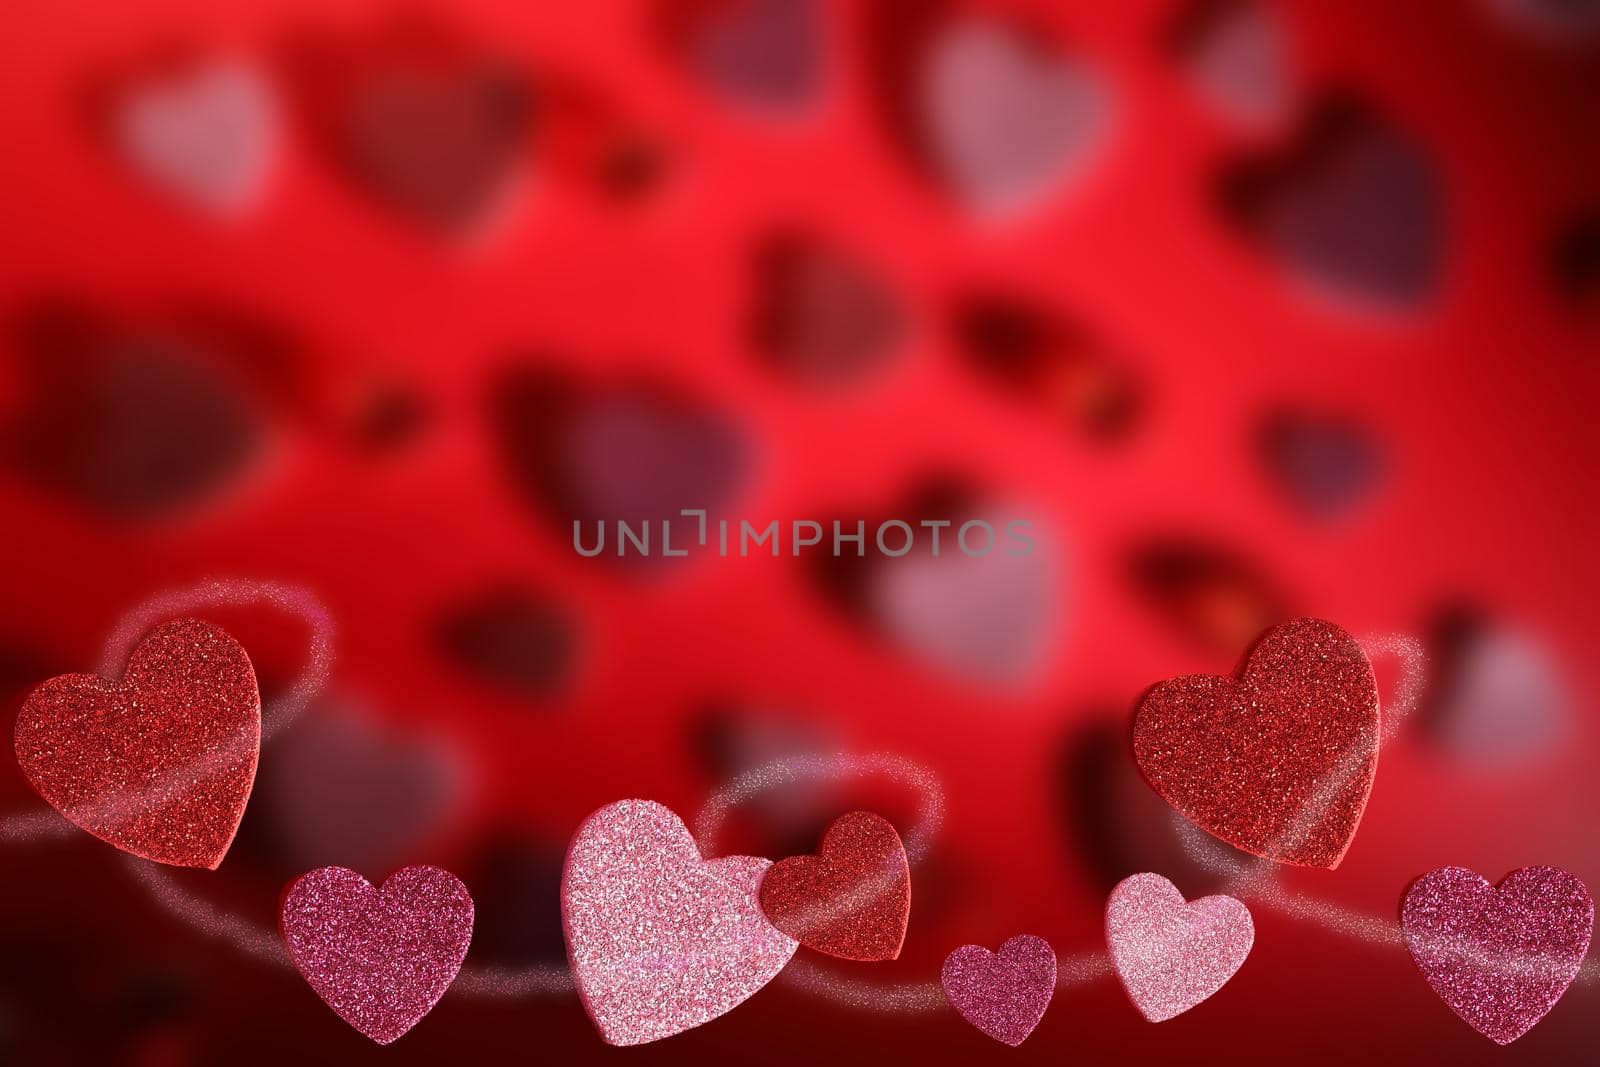 Glittery Pink and Red Hearts on a Defocused Red Heart Background by markvandam